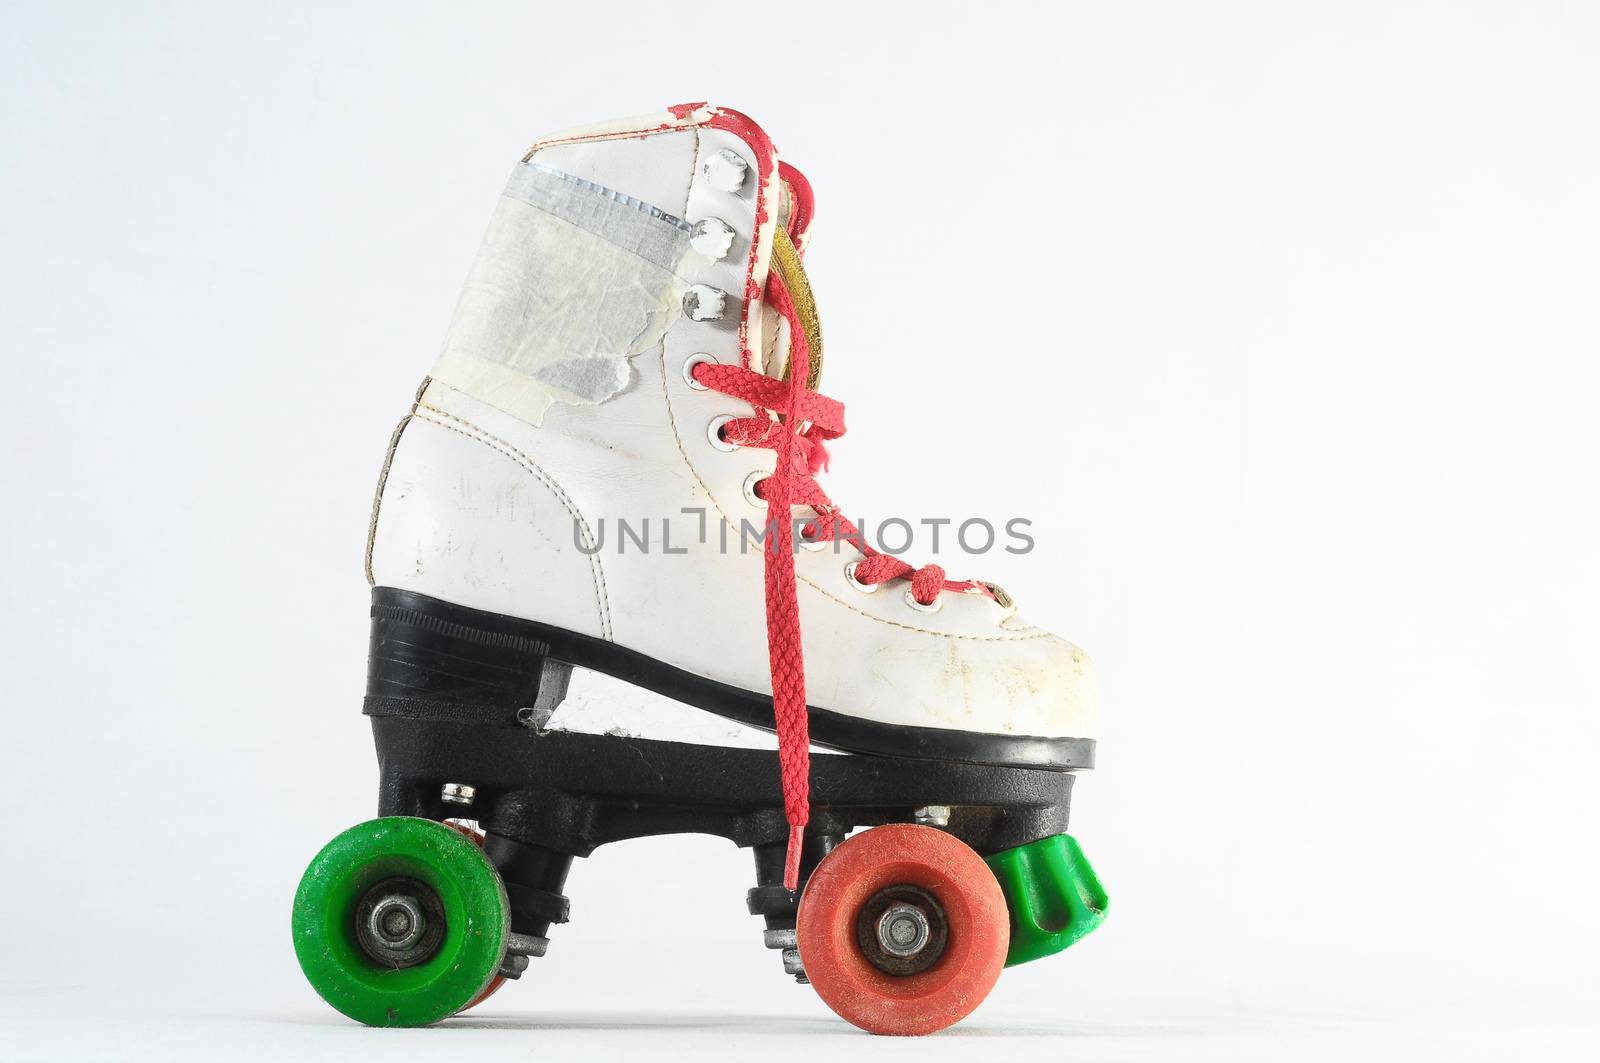 Used Vintage Consumed Roller Skate on a White Background